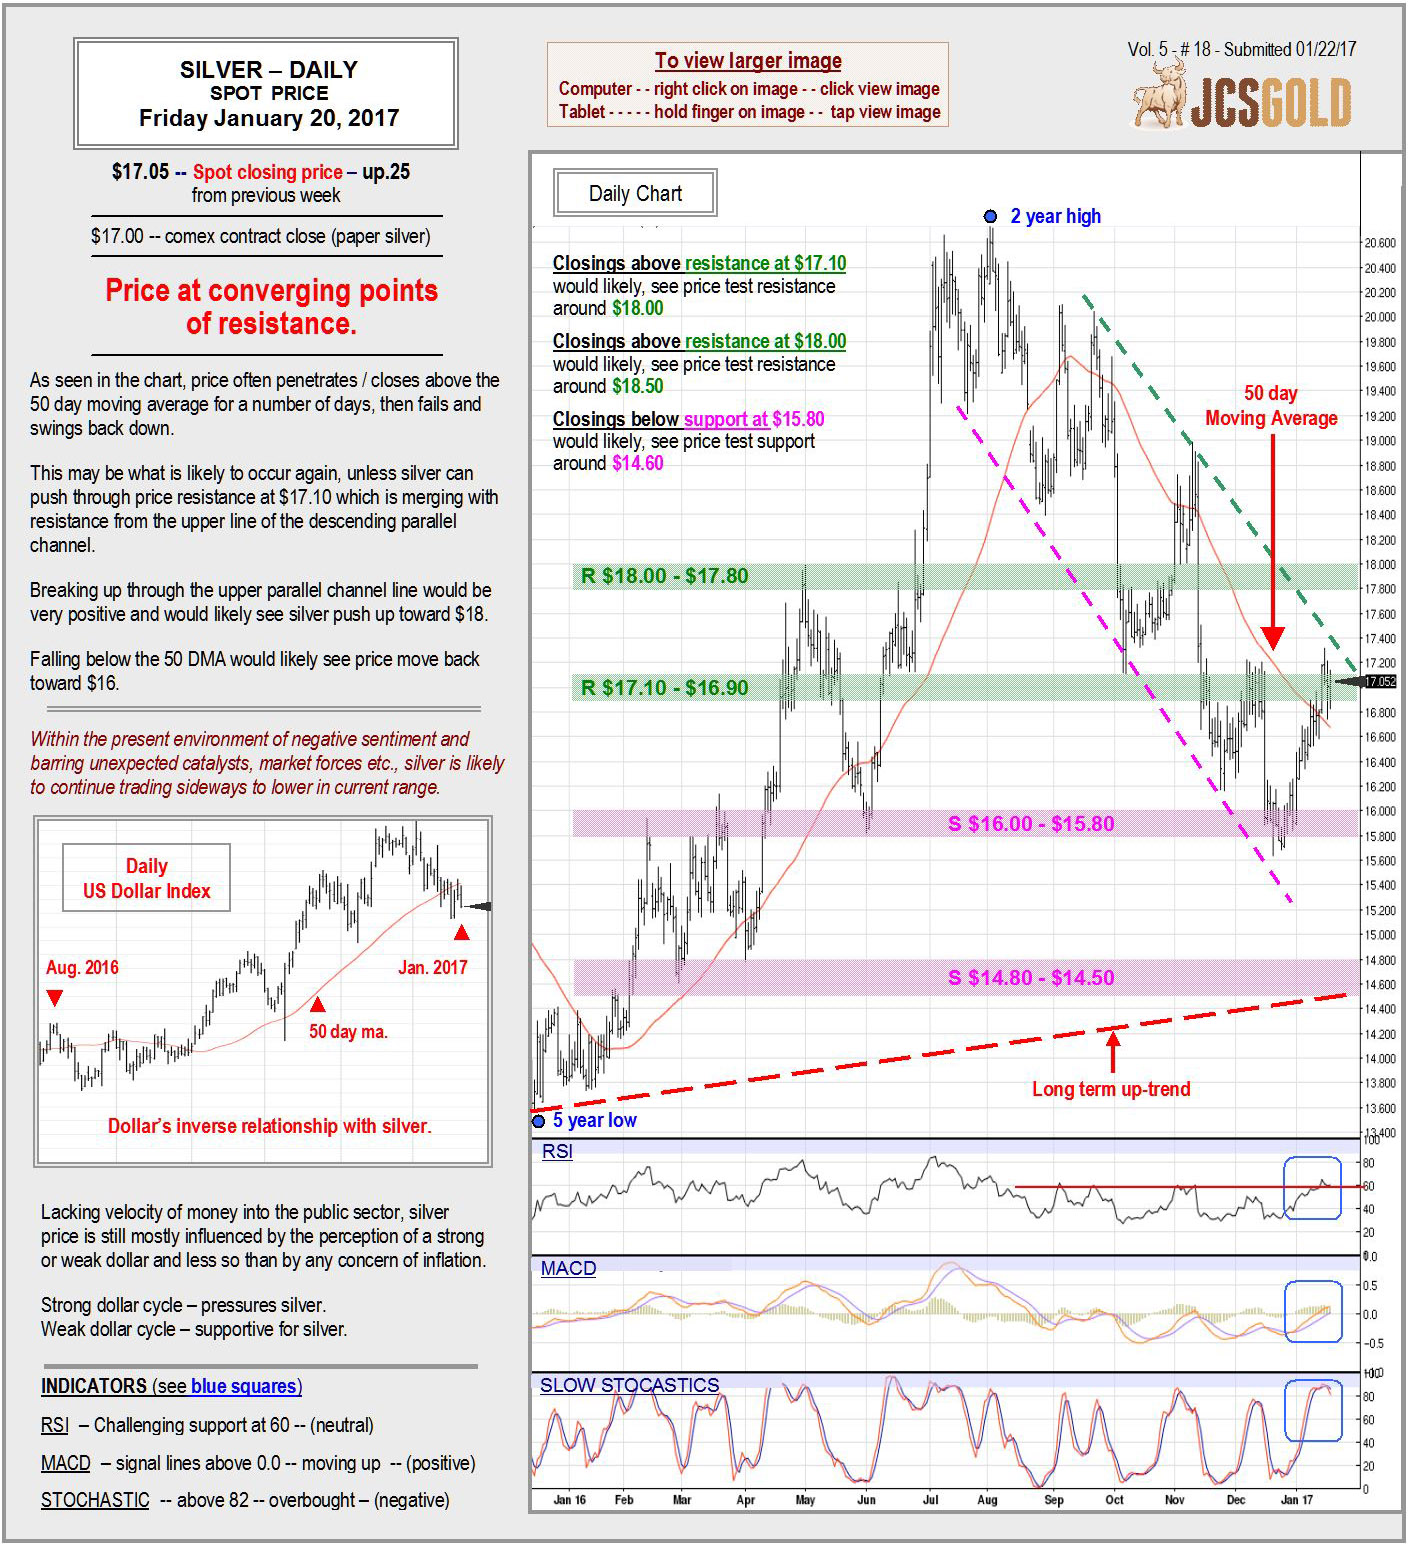 Jan 20, 2017 chart & commentary